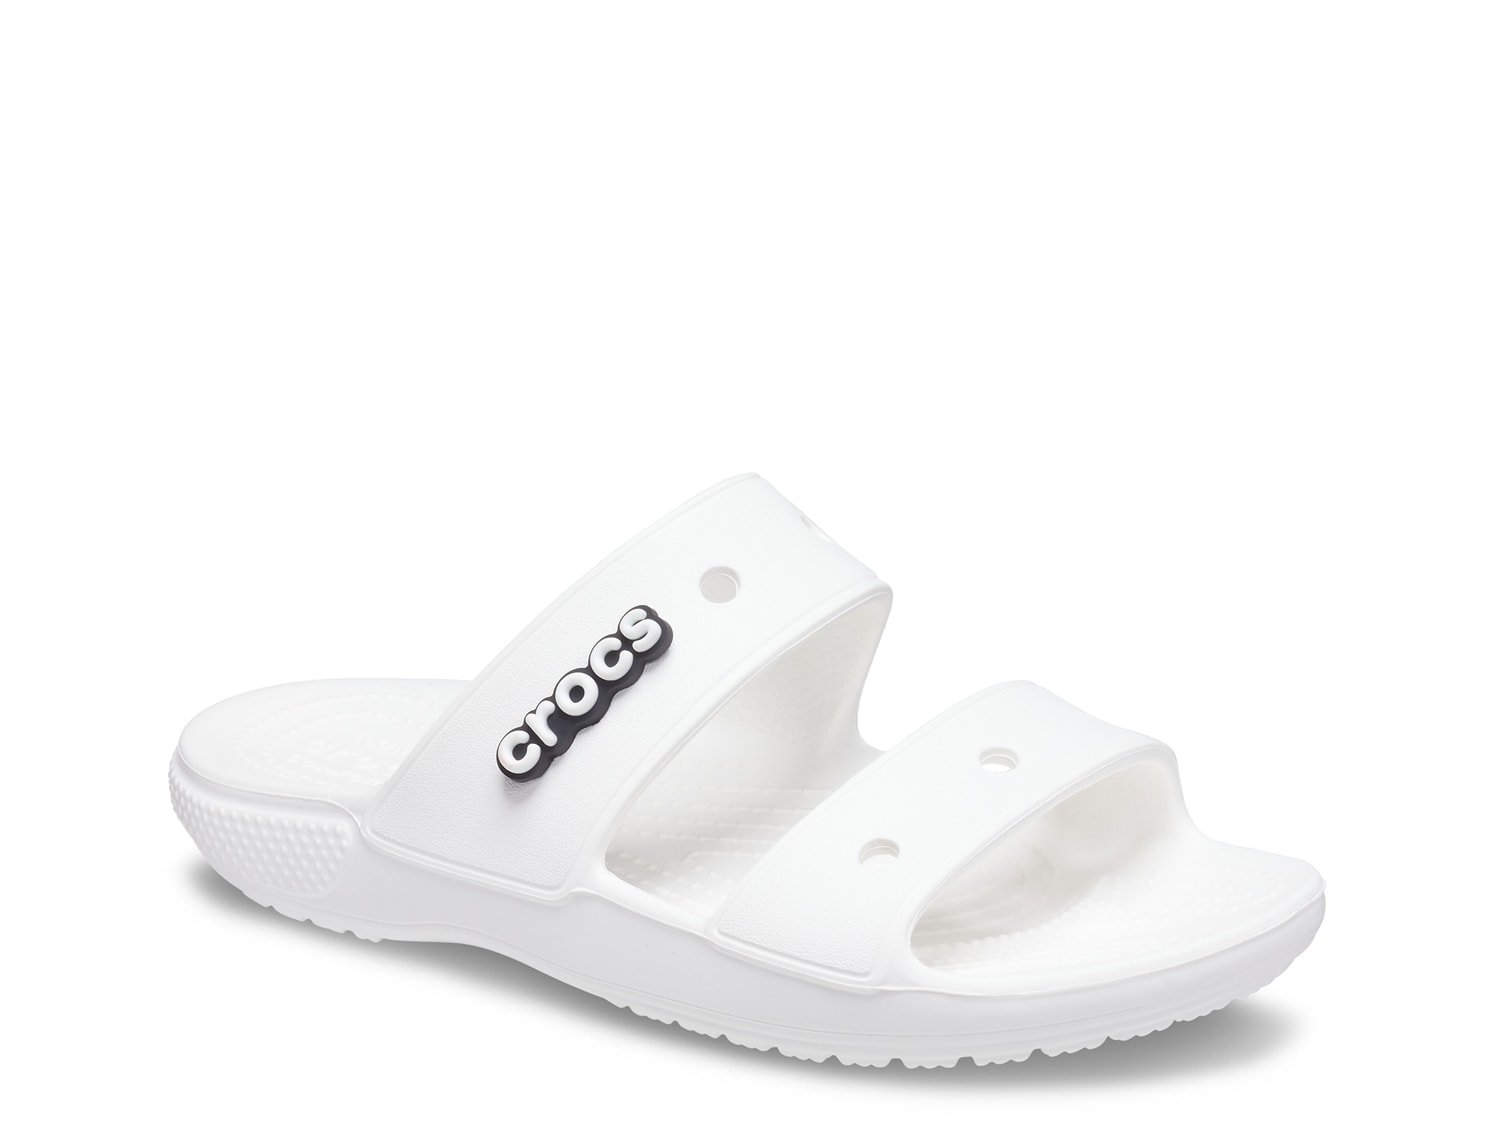 Replacement Heel Strap for Croc White